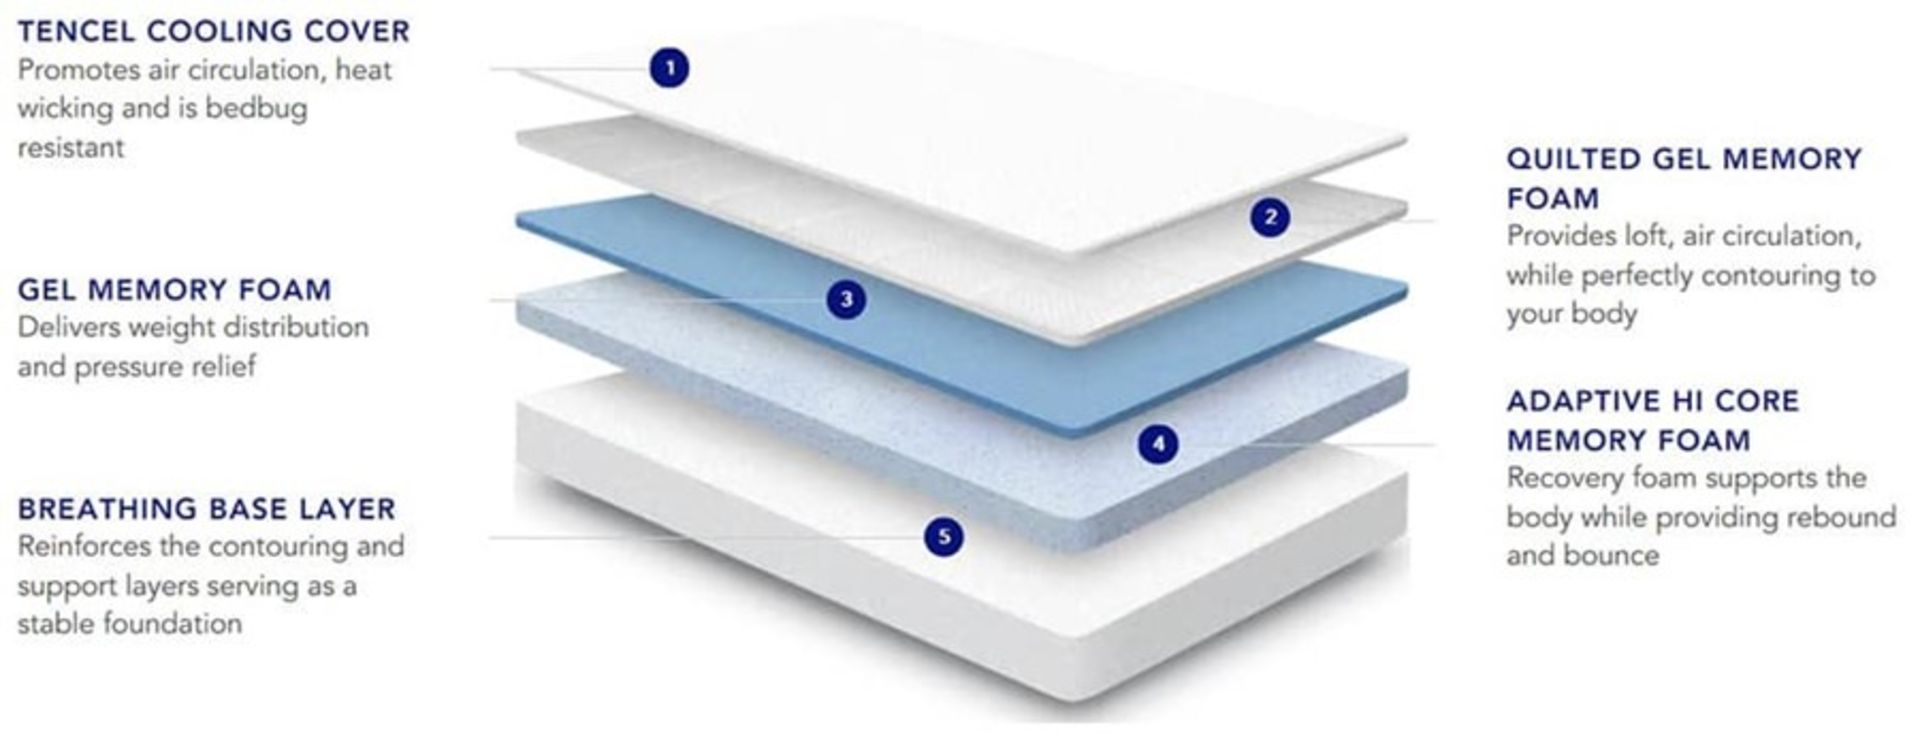 Nectar Professionally Refurbished Smart Pressure Relieving Single size Memory Foam Mattress, This - Image 2 of 2